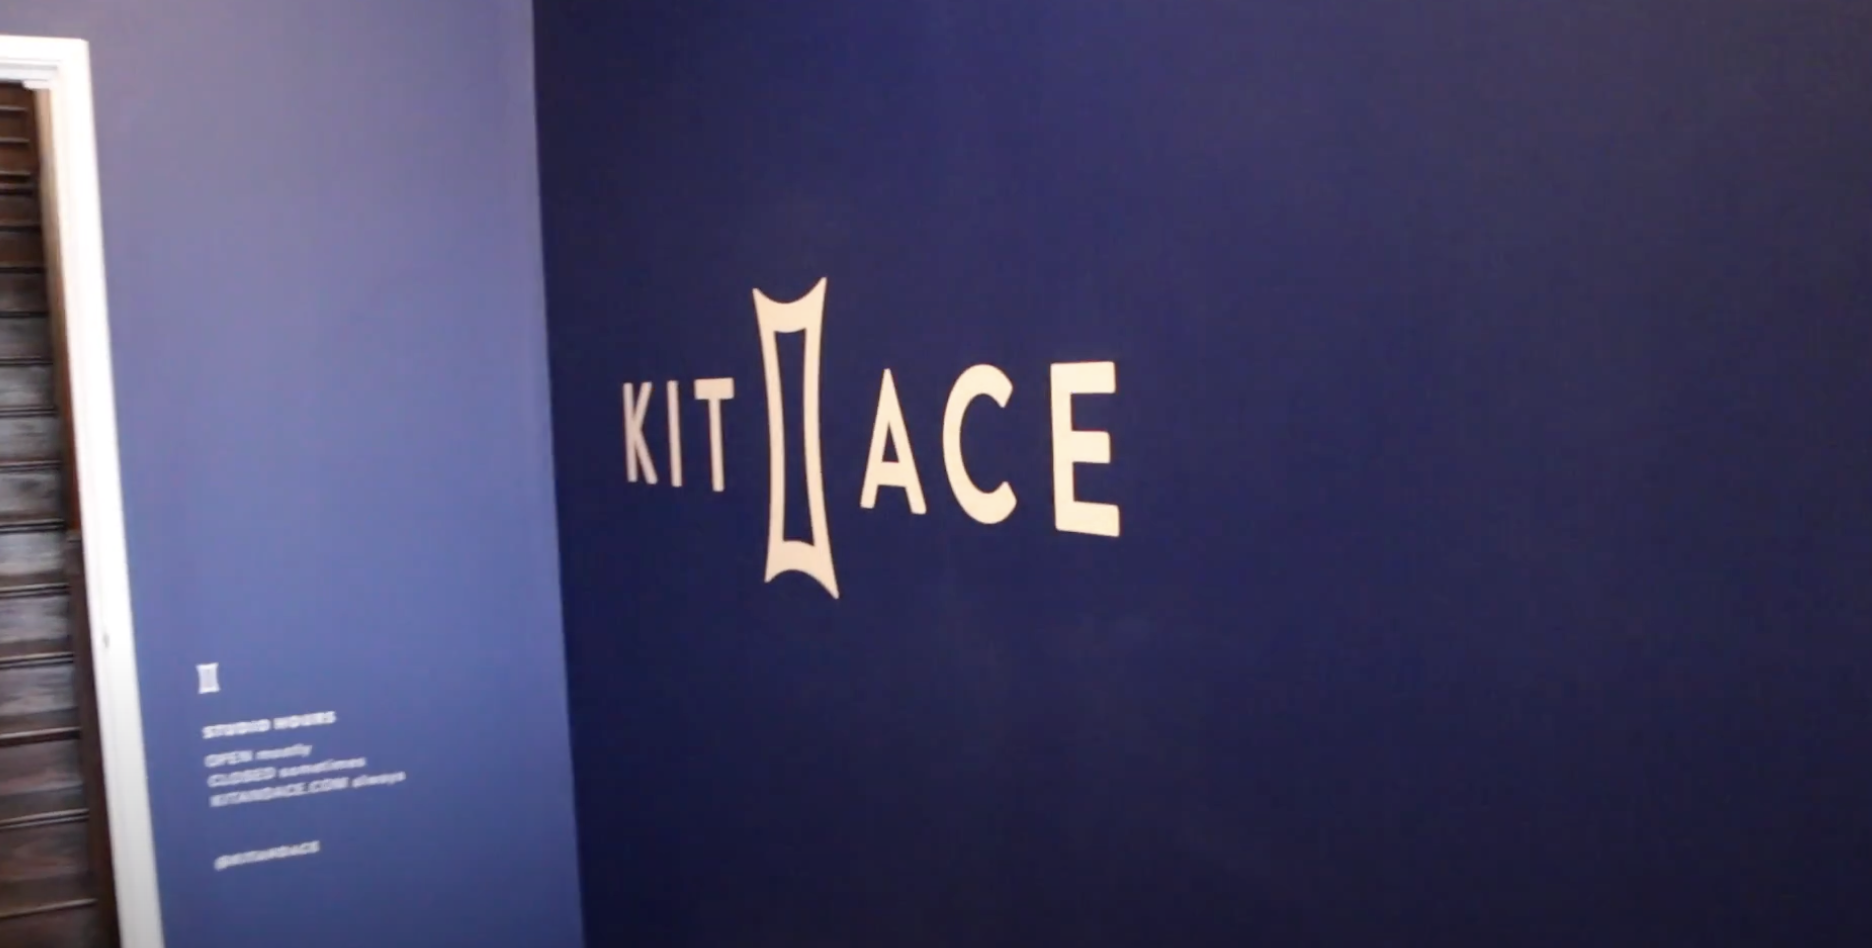 kit and ace store image